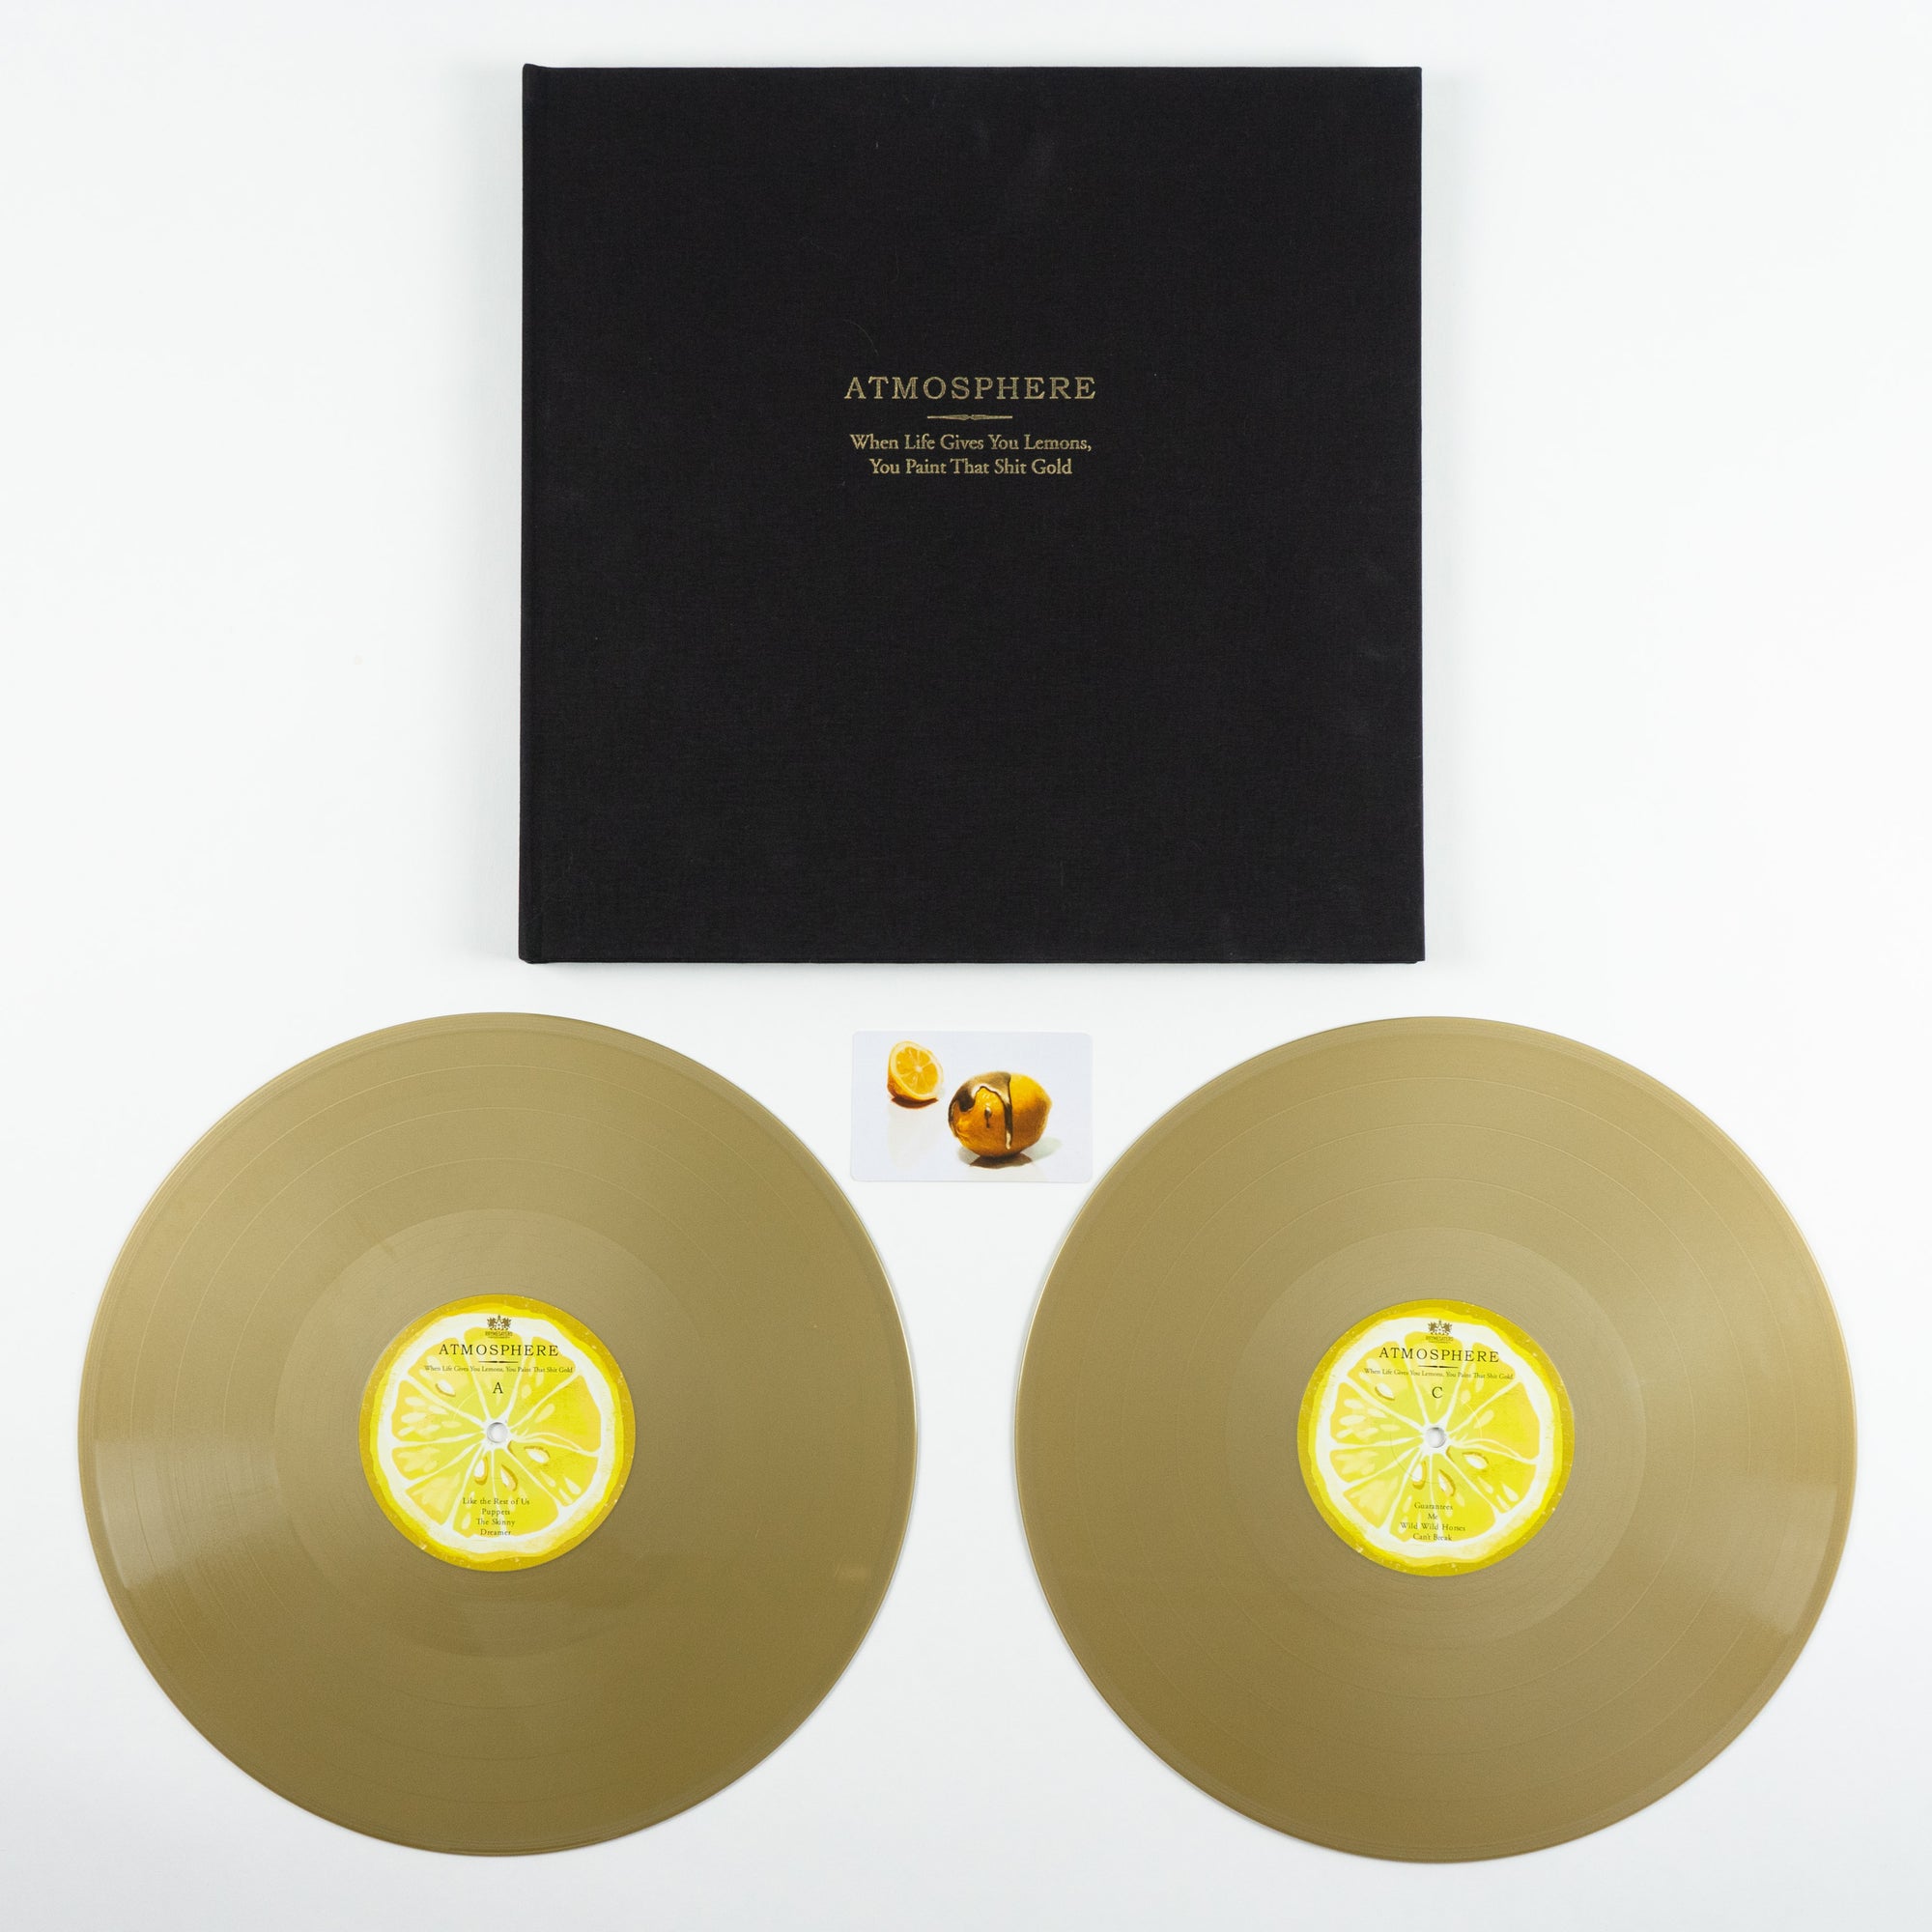 Atmosphere - When Life Gives You Lemons, You Paint That Shit Gold (10 Year Anniversary) Deluxe Vinyl